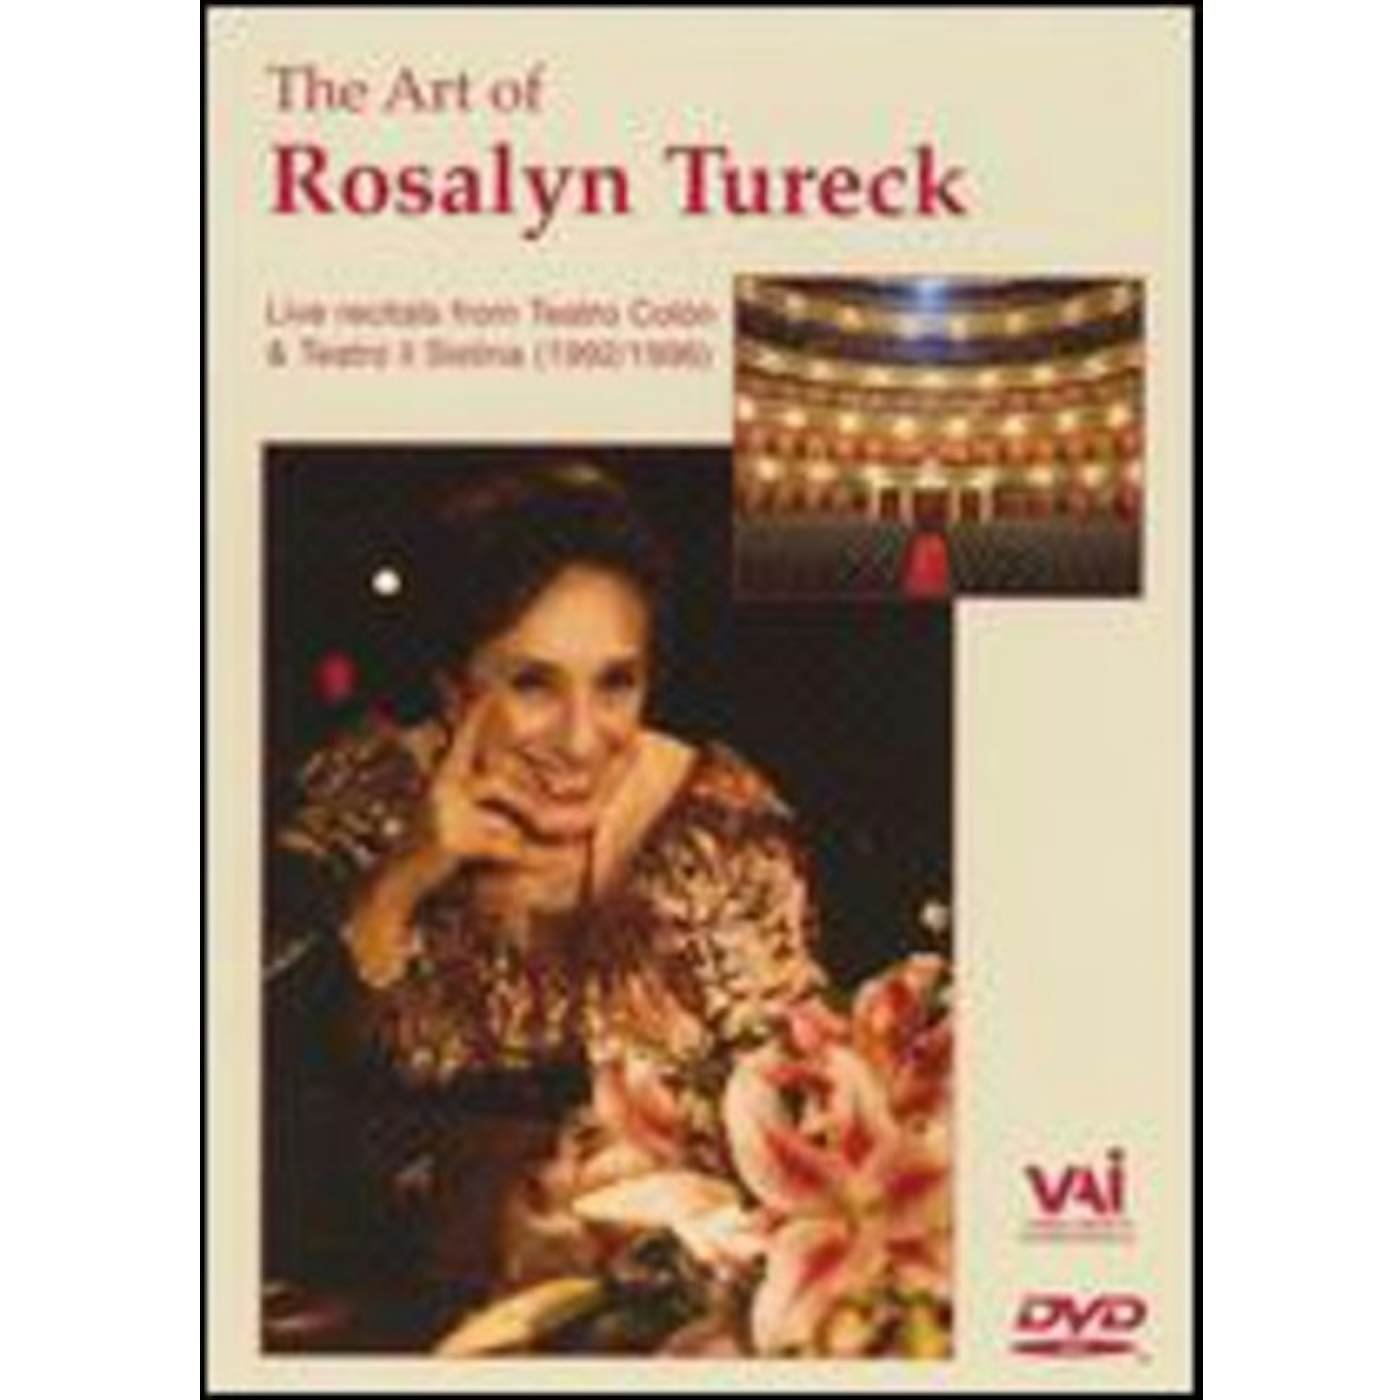 Rosalyn Tureck LIVE BACH CONCERT / LIVE AT THE TEATRO COLON DVD